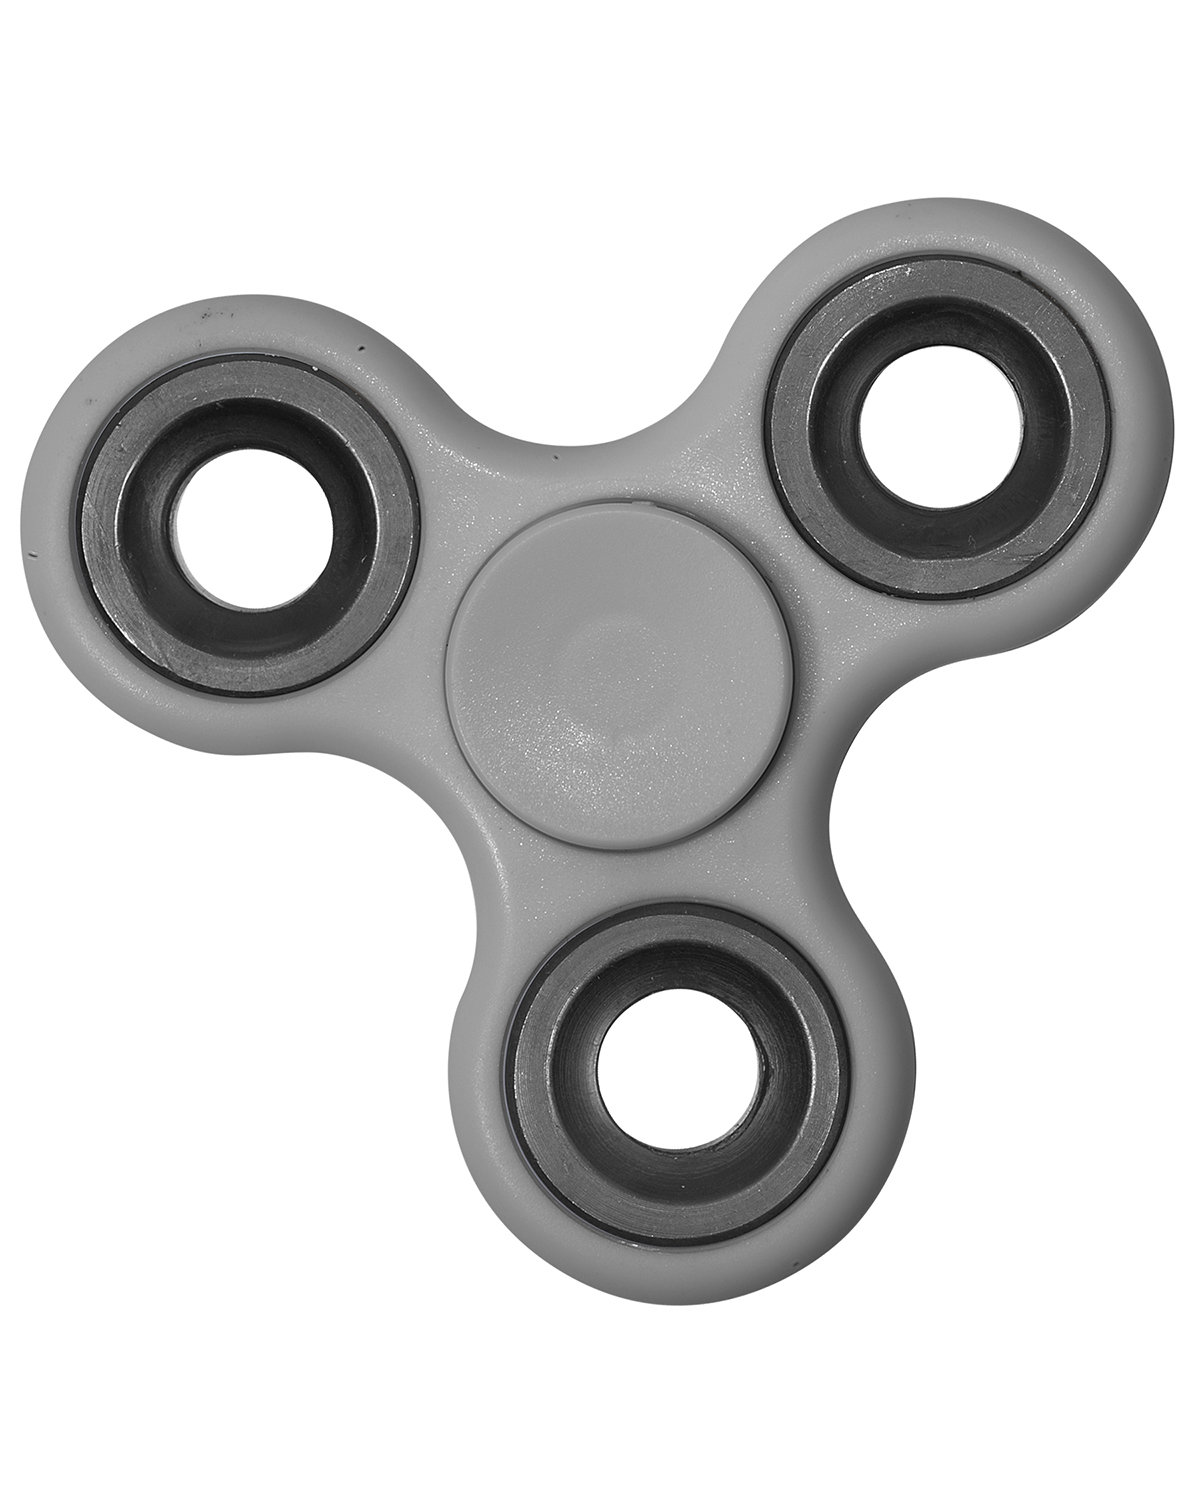 Prime Line Promospinner® Turbo-Boost gray 